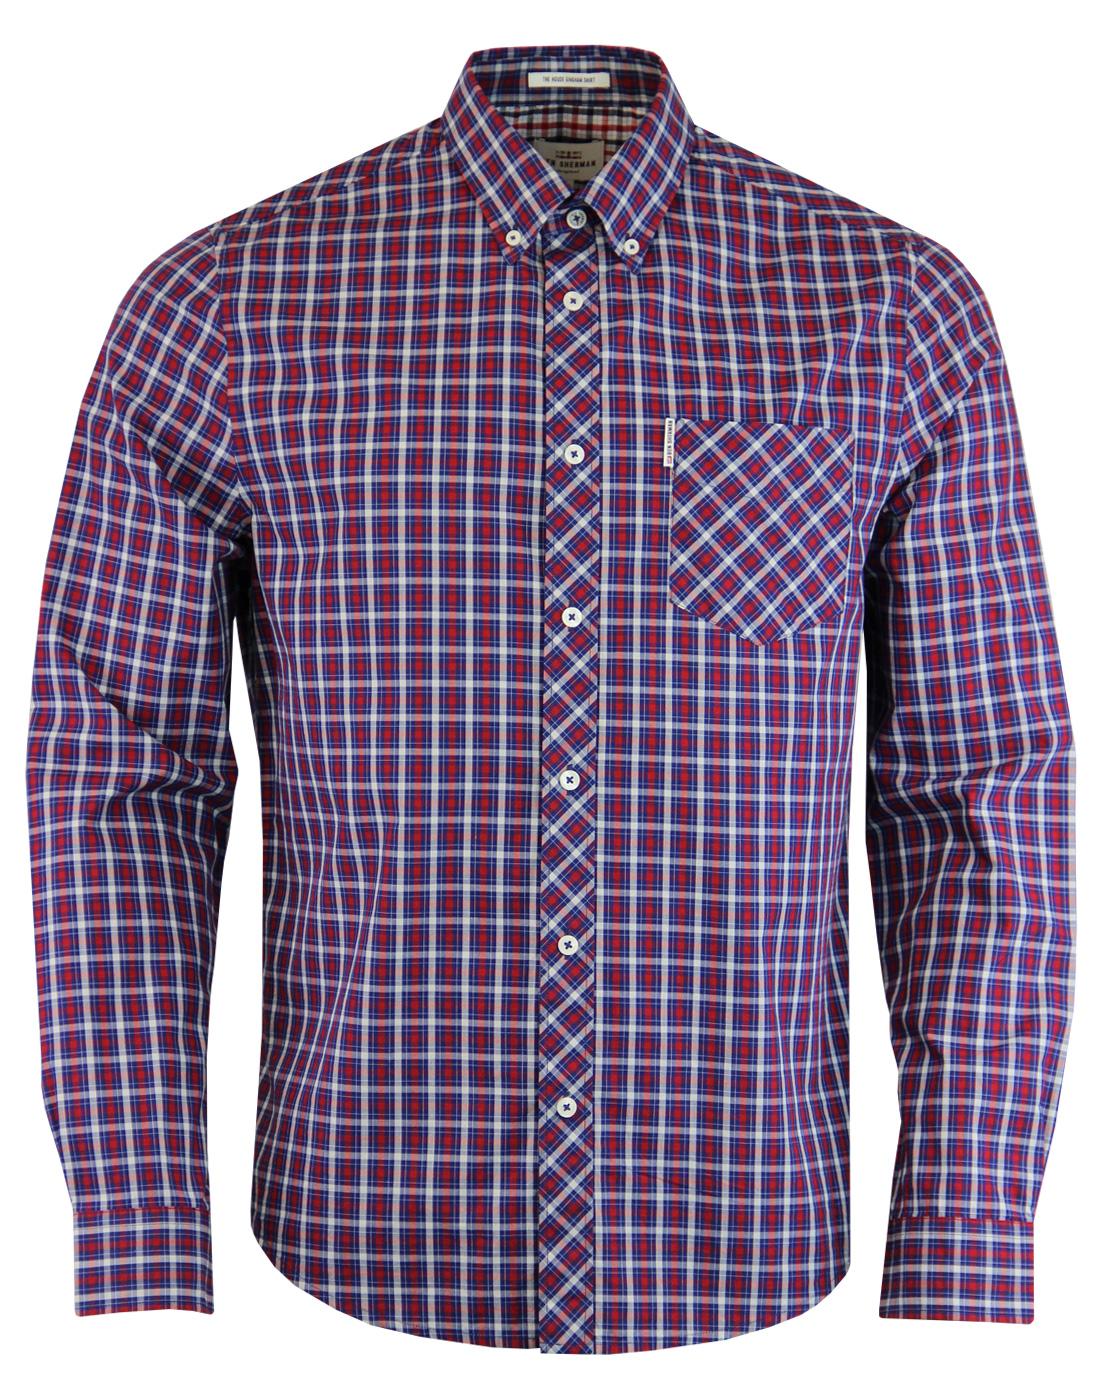 BEN SHERMAN Mod 60s House Check Shirt in Red